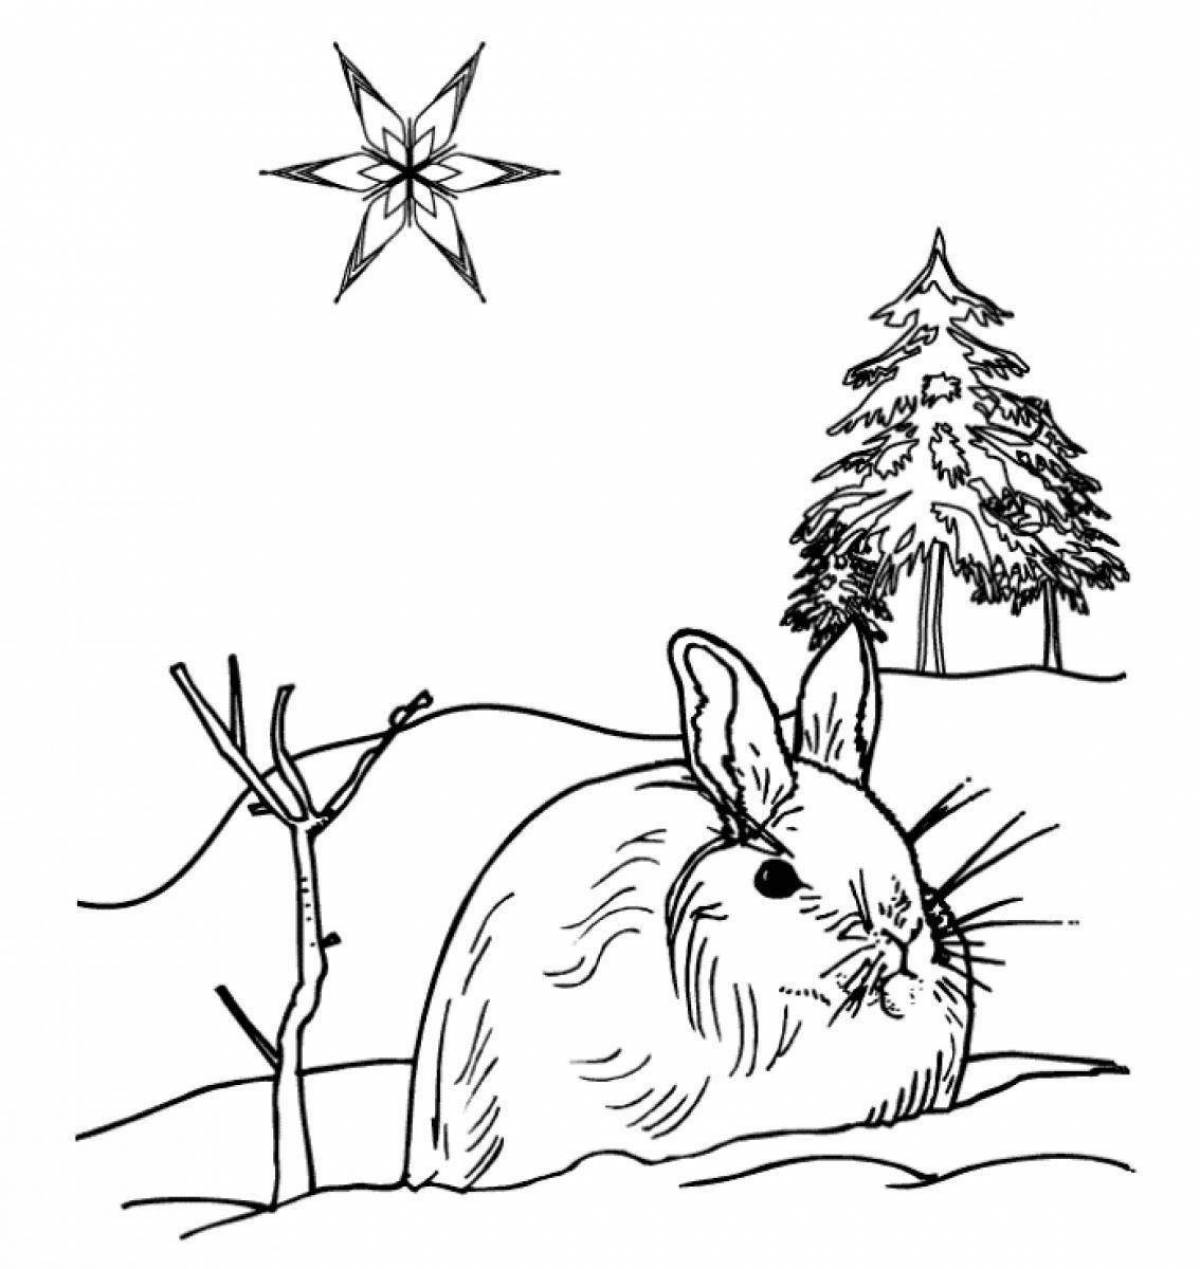 Shimmering bunny winter coloring book